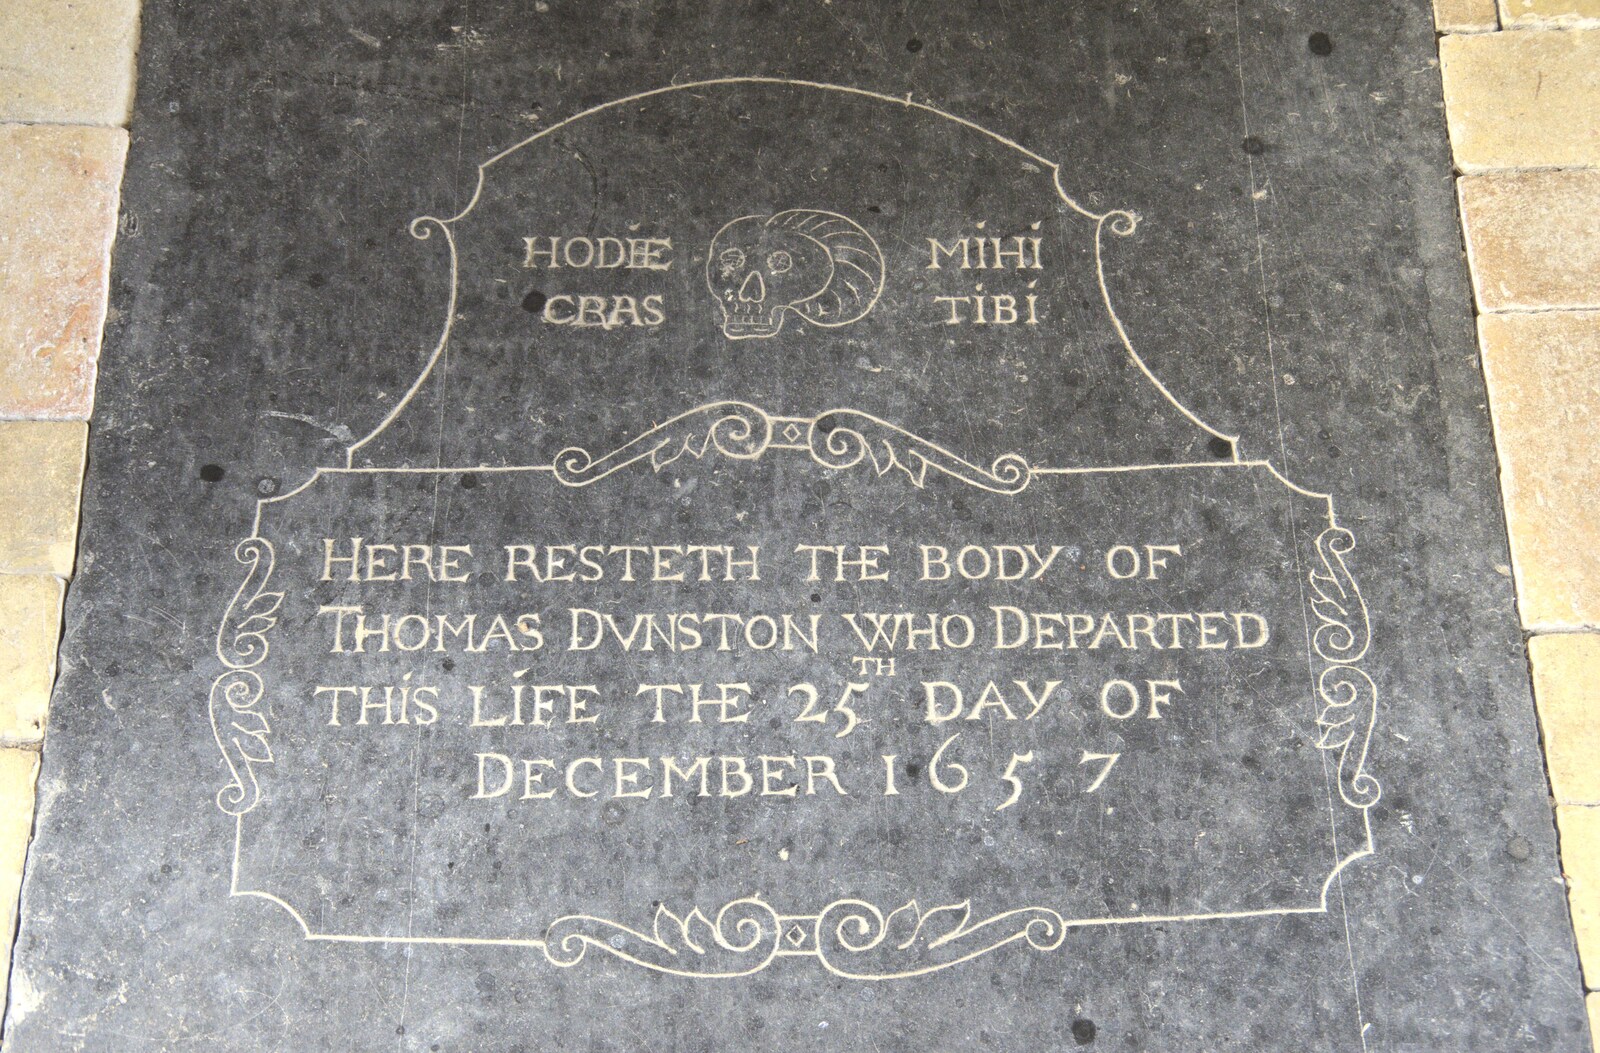 The ledger stone of Thomas Dunston, 1657 from The BSCC at the Cock Inn and a Flute Exam, Bedfield, Suffolk - 25th August 2023